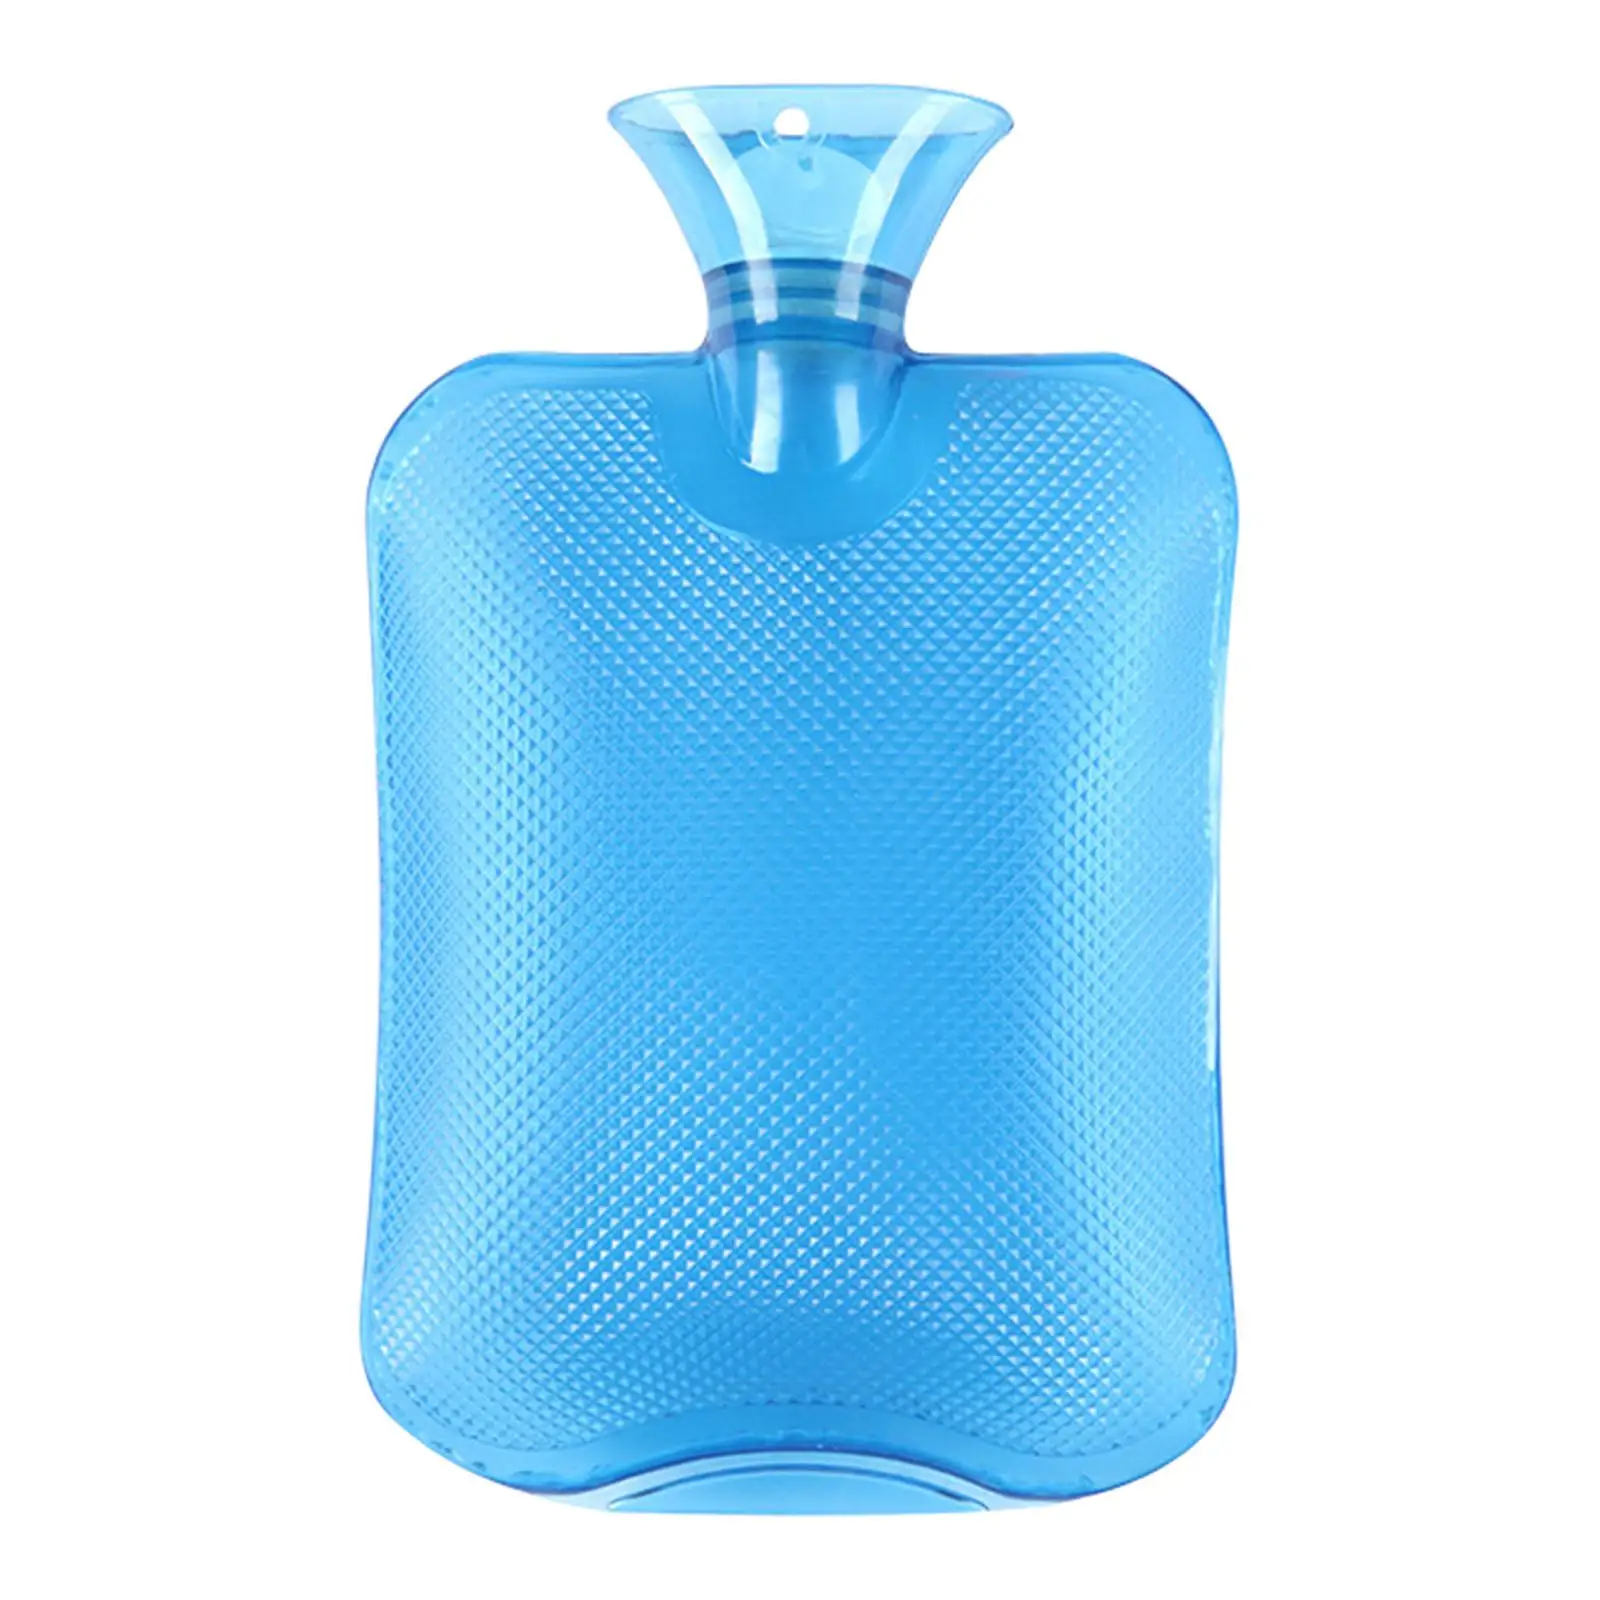 Premium PVC Hot Water Bottle, Large 2 Liter Hand Warmer, Hot Water Bag, Durable Water Filling Bag, 2mm Thick